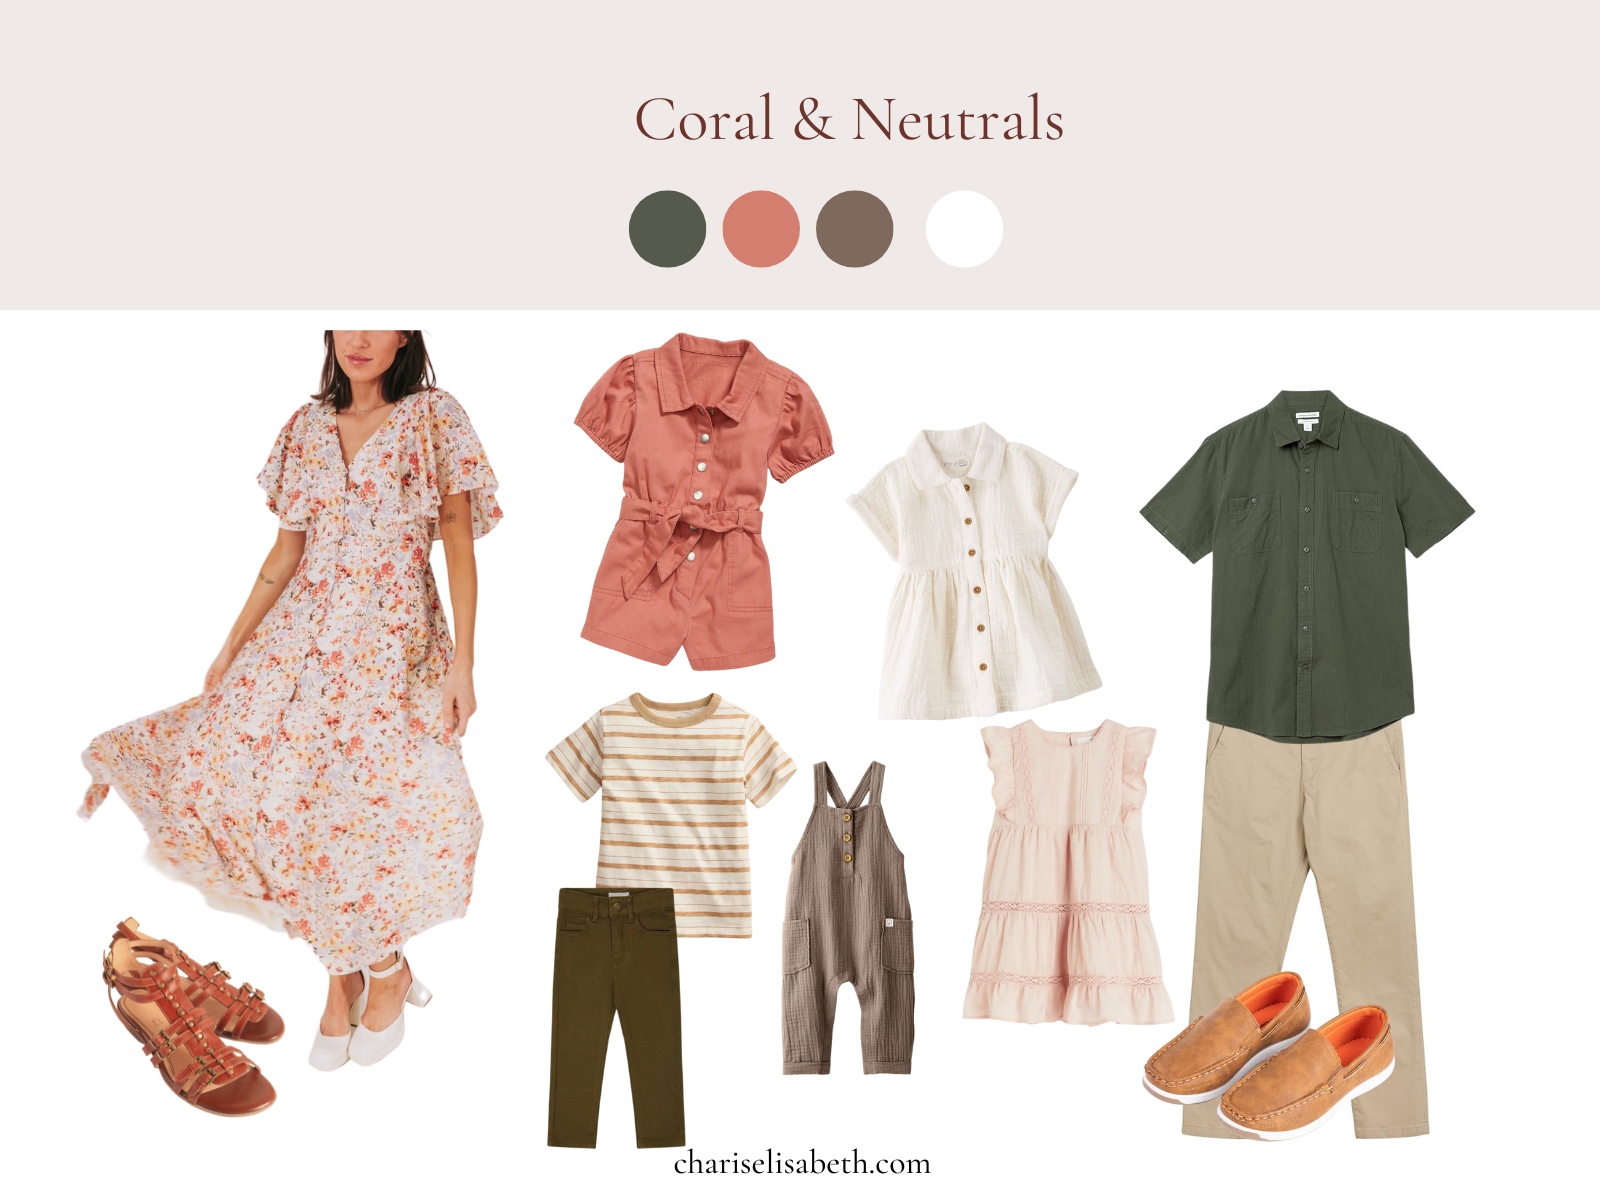 Ideas for what to wear in pinks and greens and neutrals for a summer photoshoot.